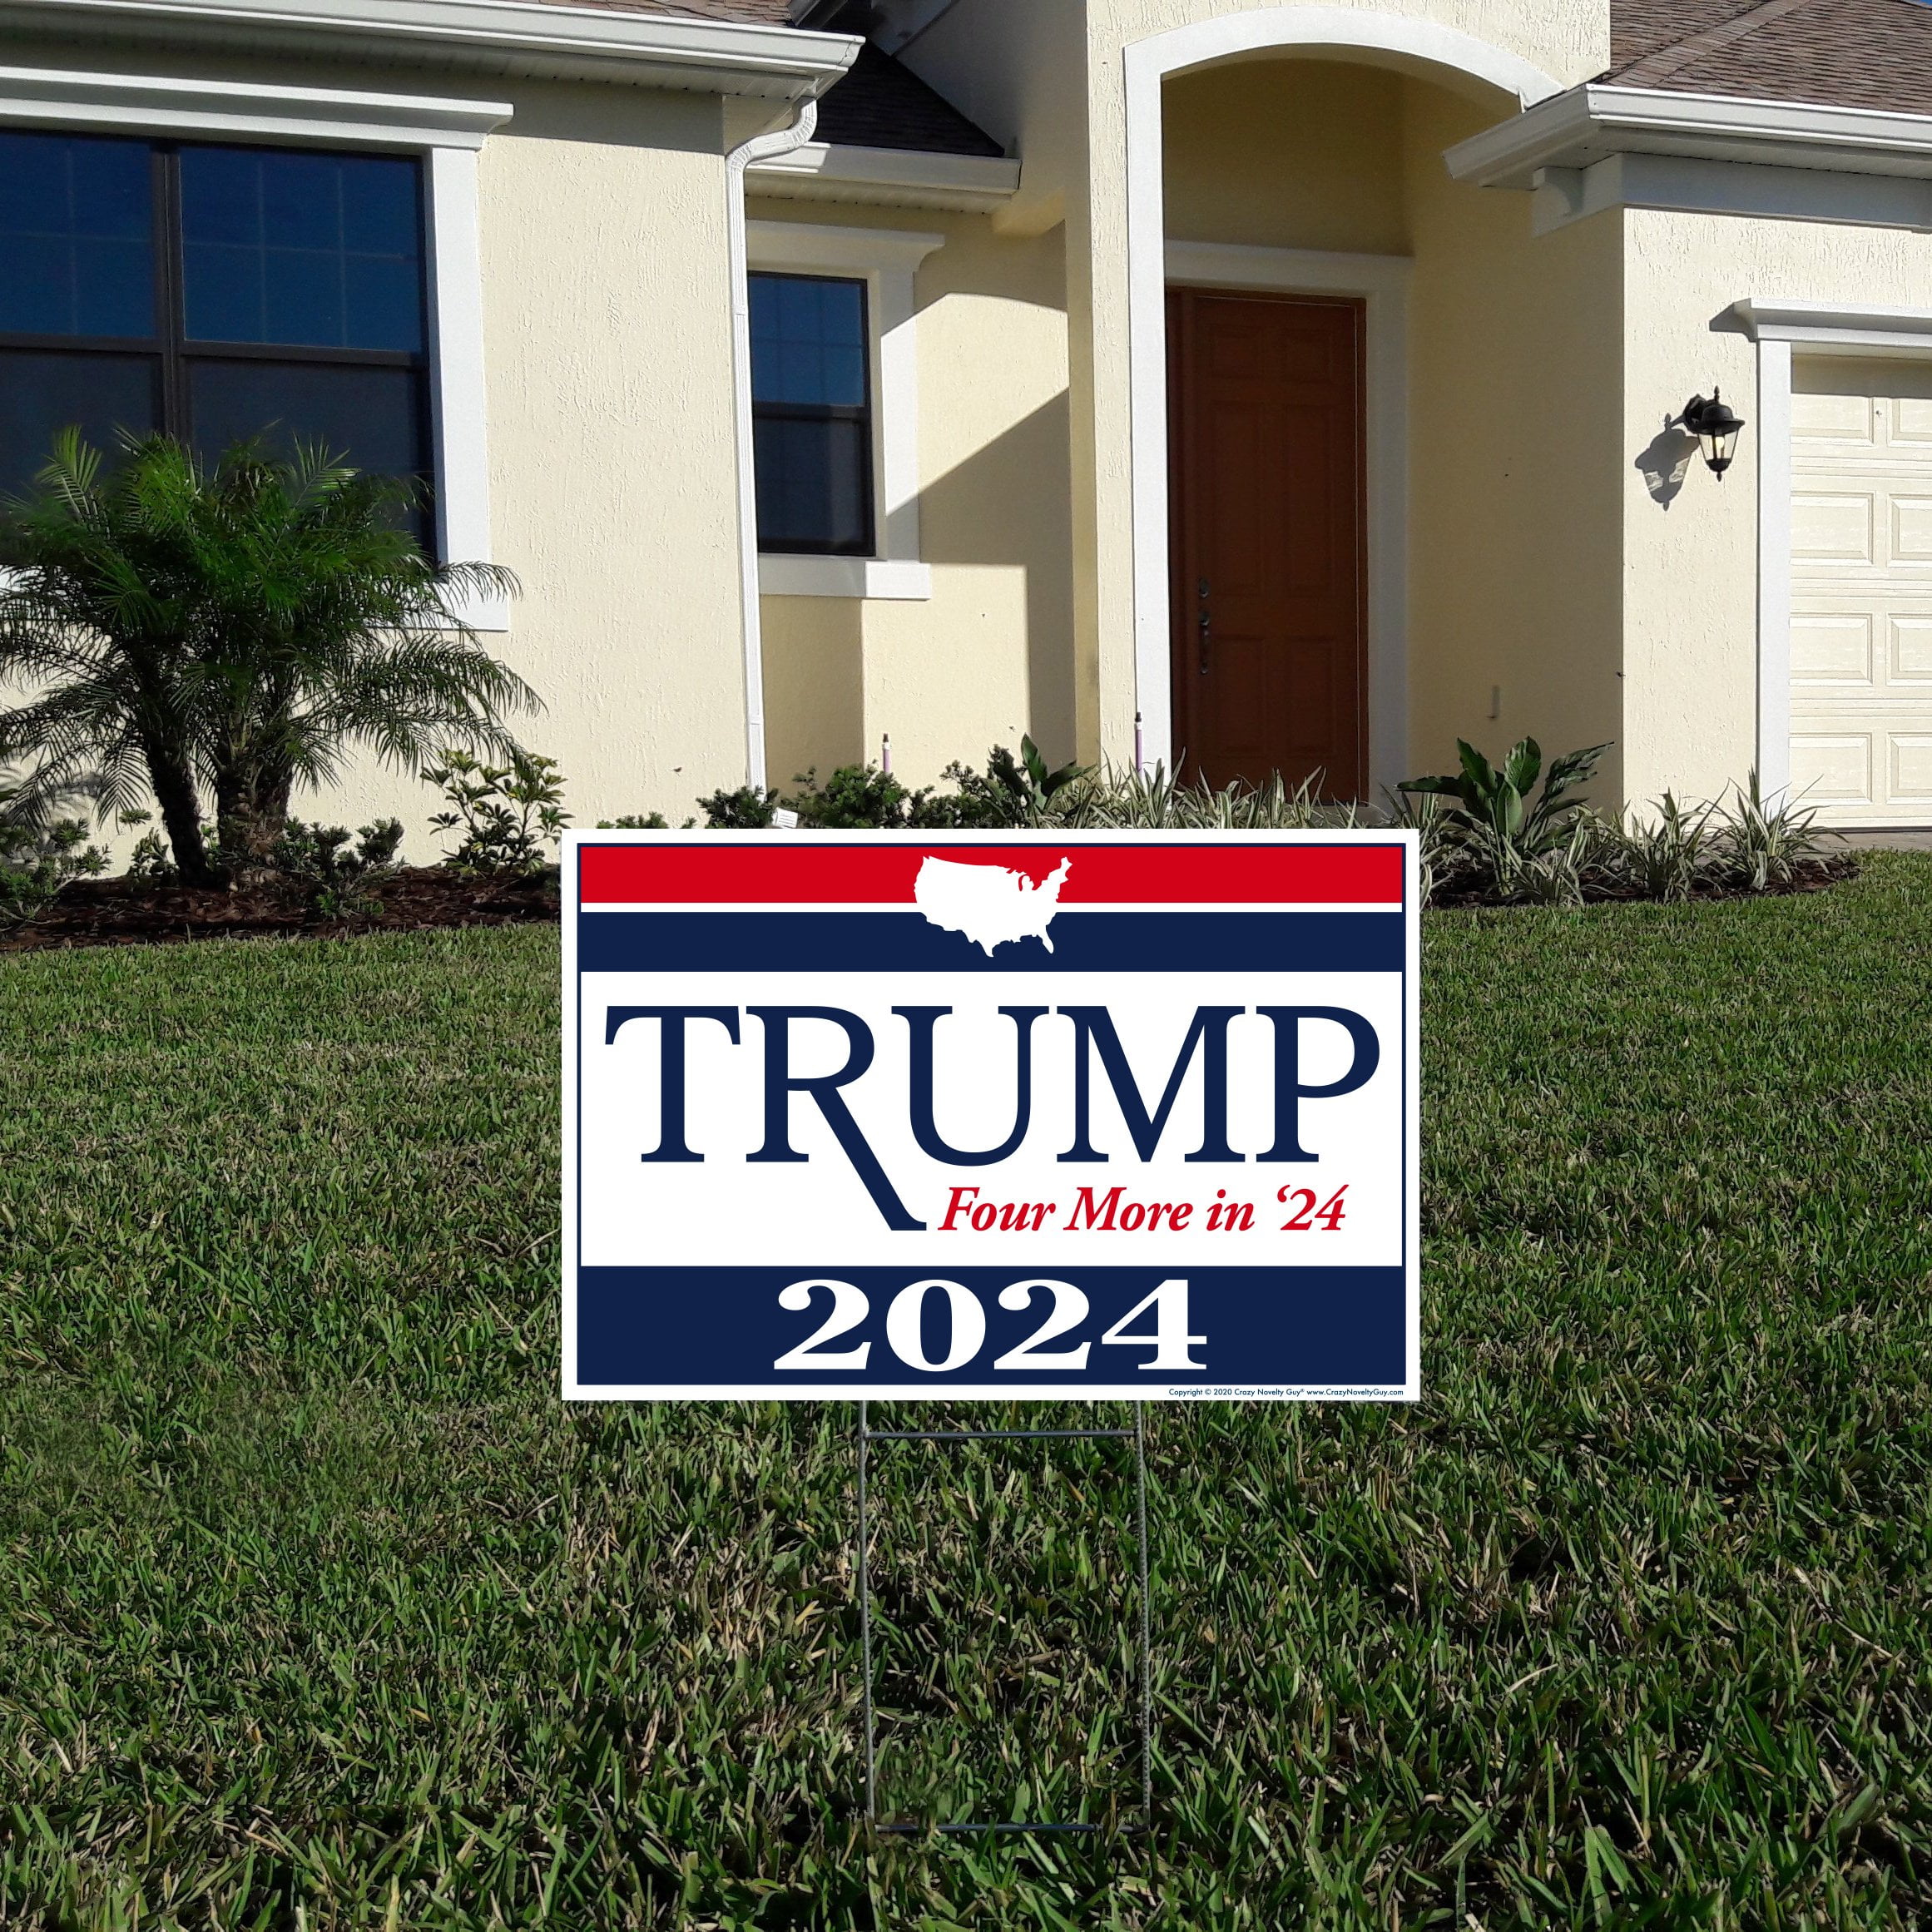 DONALD TRUMP 2020 POLITICAL CAMPAIGN YARD SIGN 18"x12" W/STAKE DOUBLE SIDED USA 